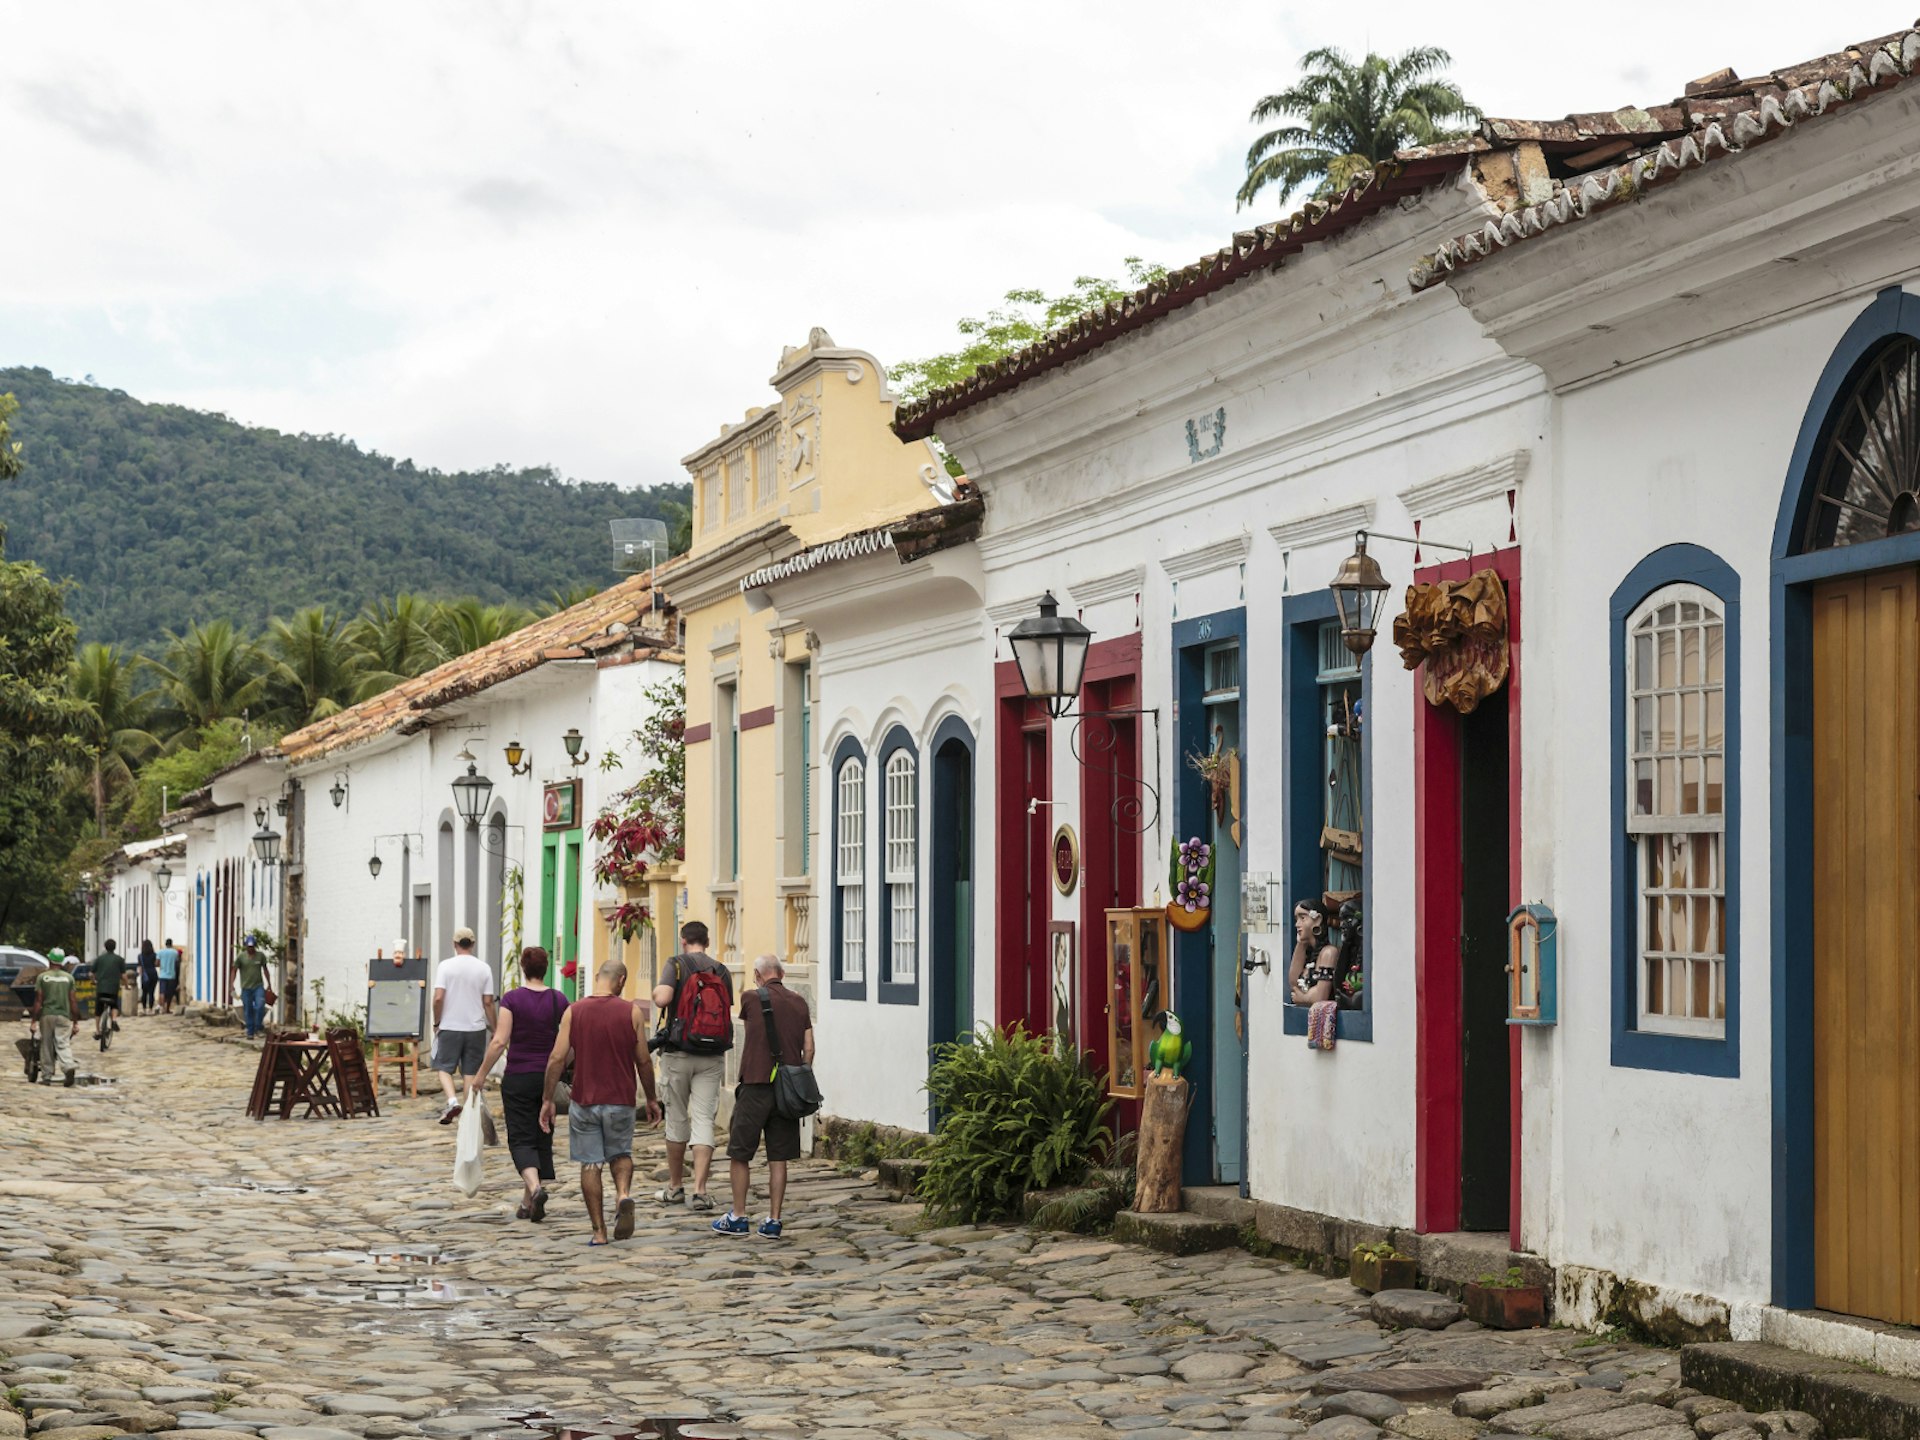 People stroll along a cobbled street in the colonial town of Paraty, Brazil